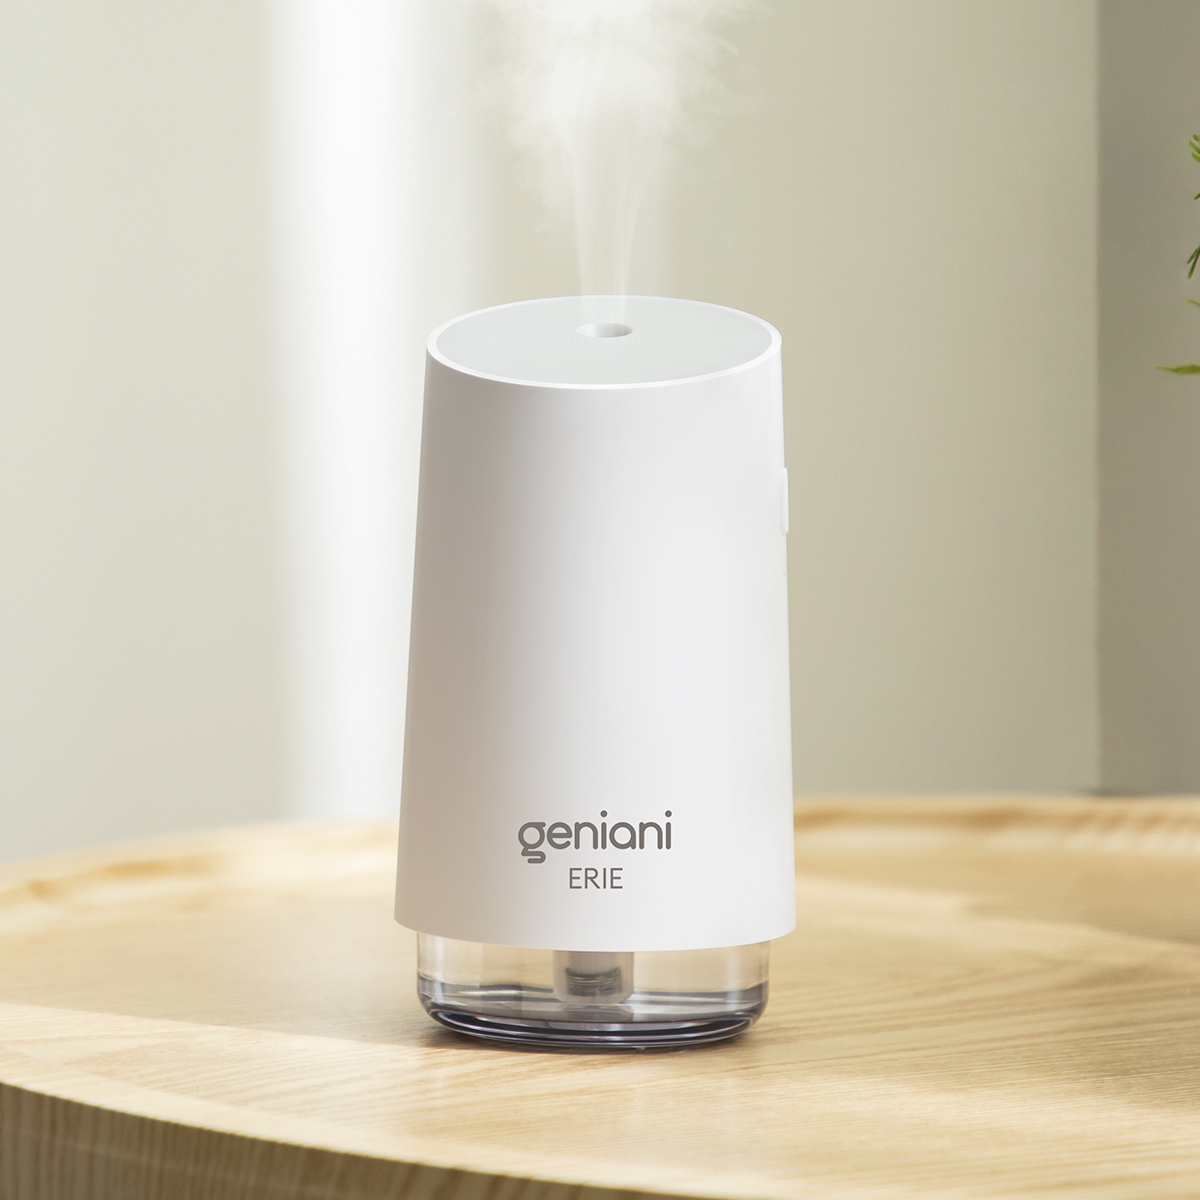 Geniani Rolls Out the First Portable Humidifier Called Erie 